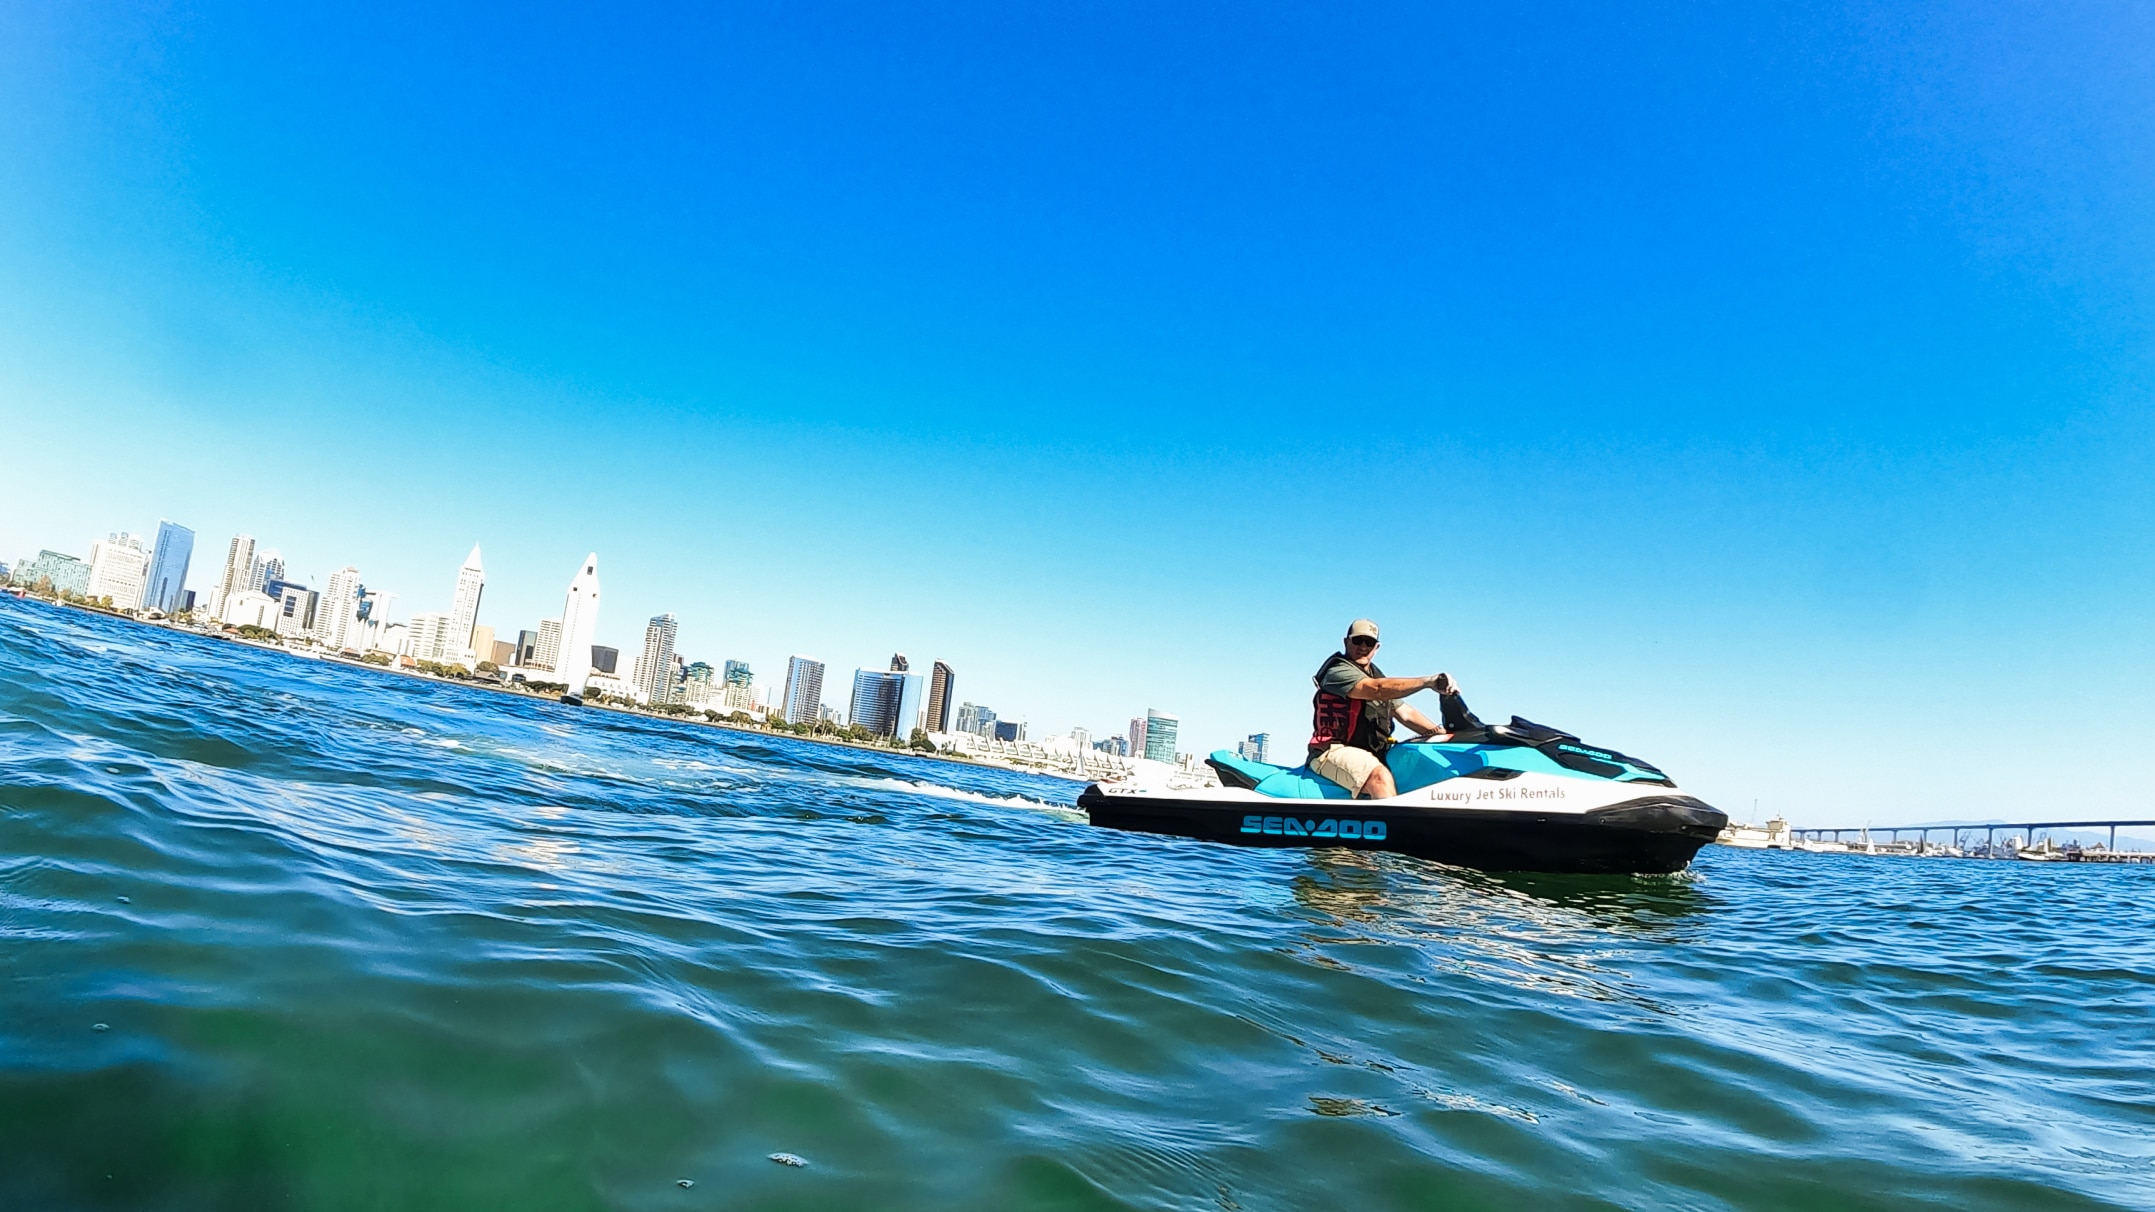 A man on a Sea-Doo in the middle of the water with a city in the background